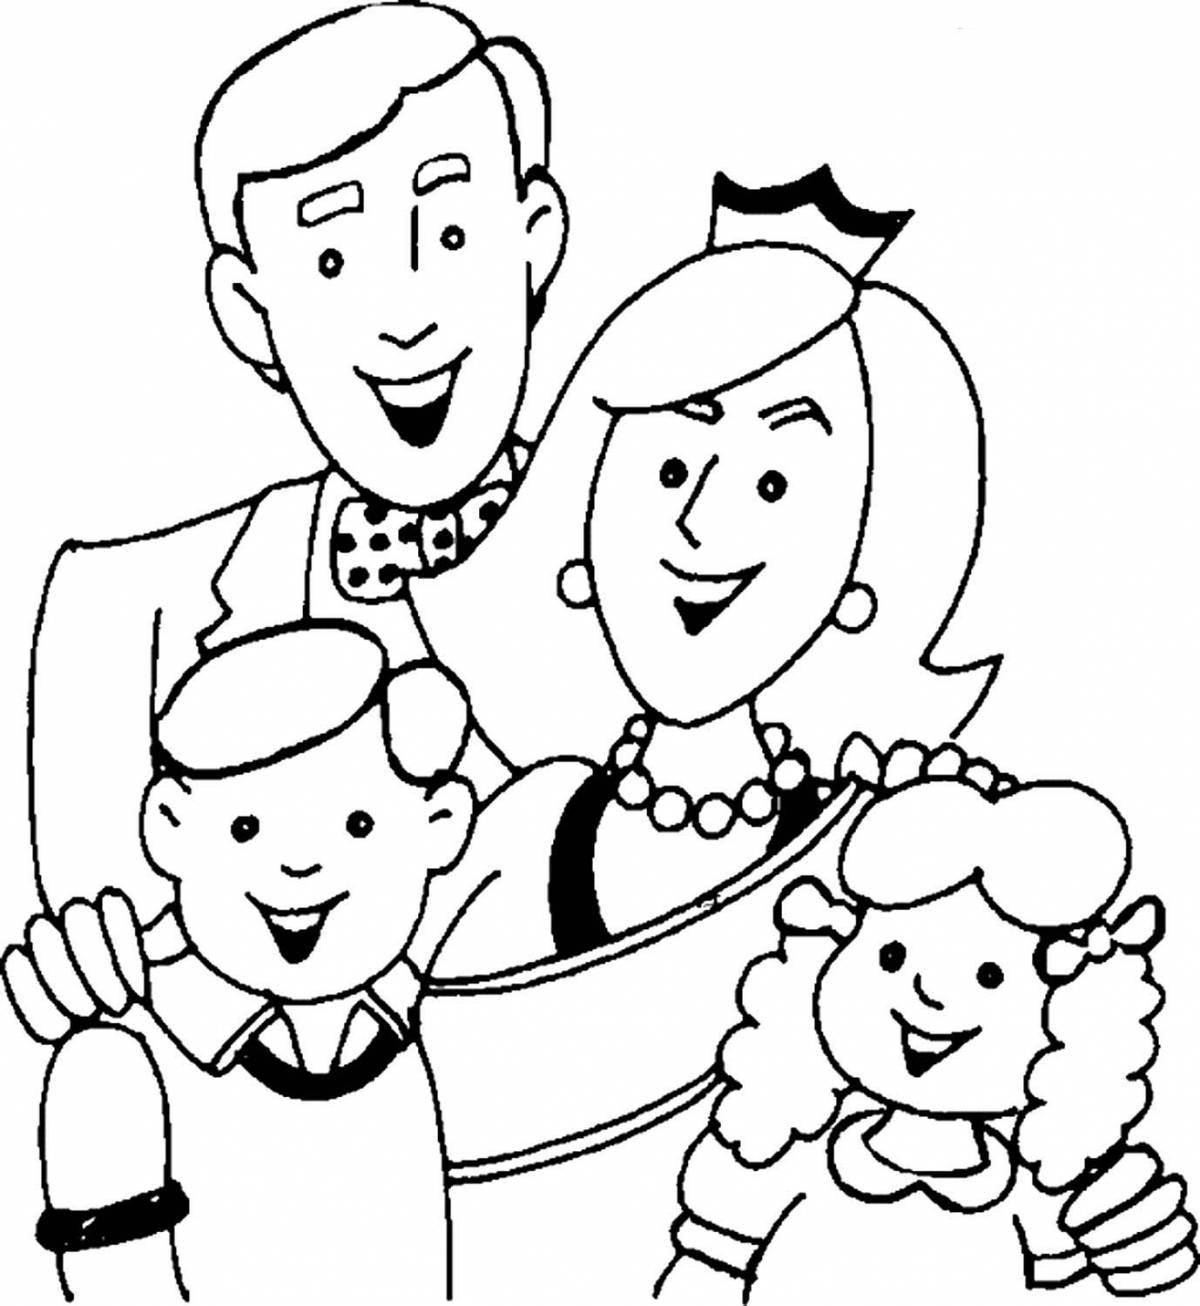 Cute mom and dad coloring pages